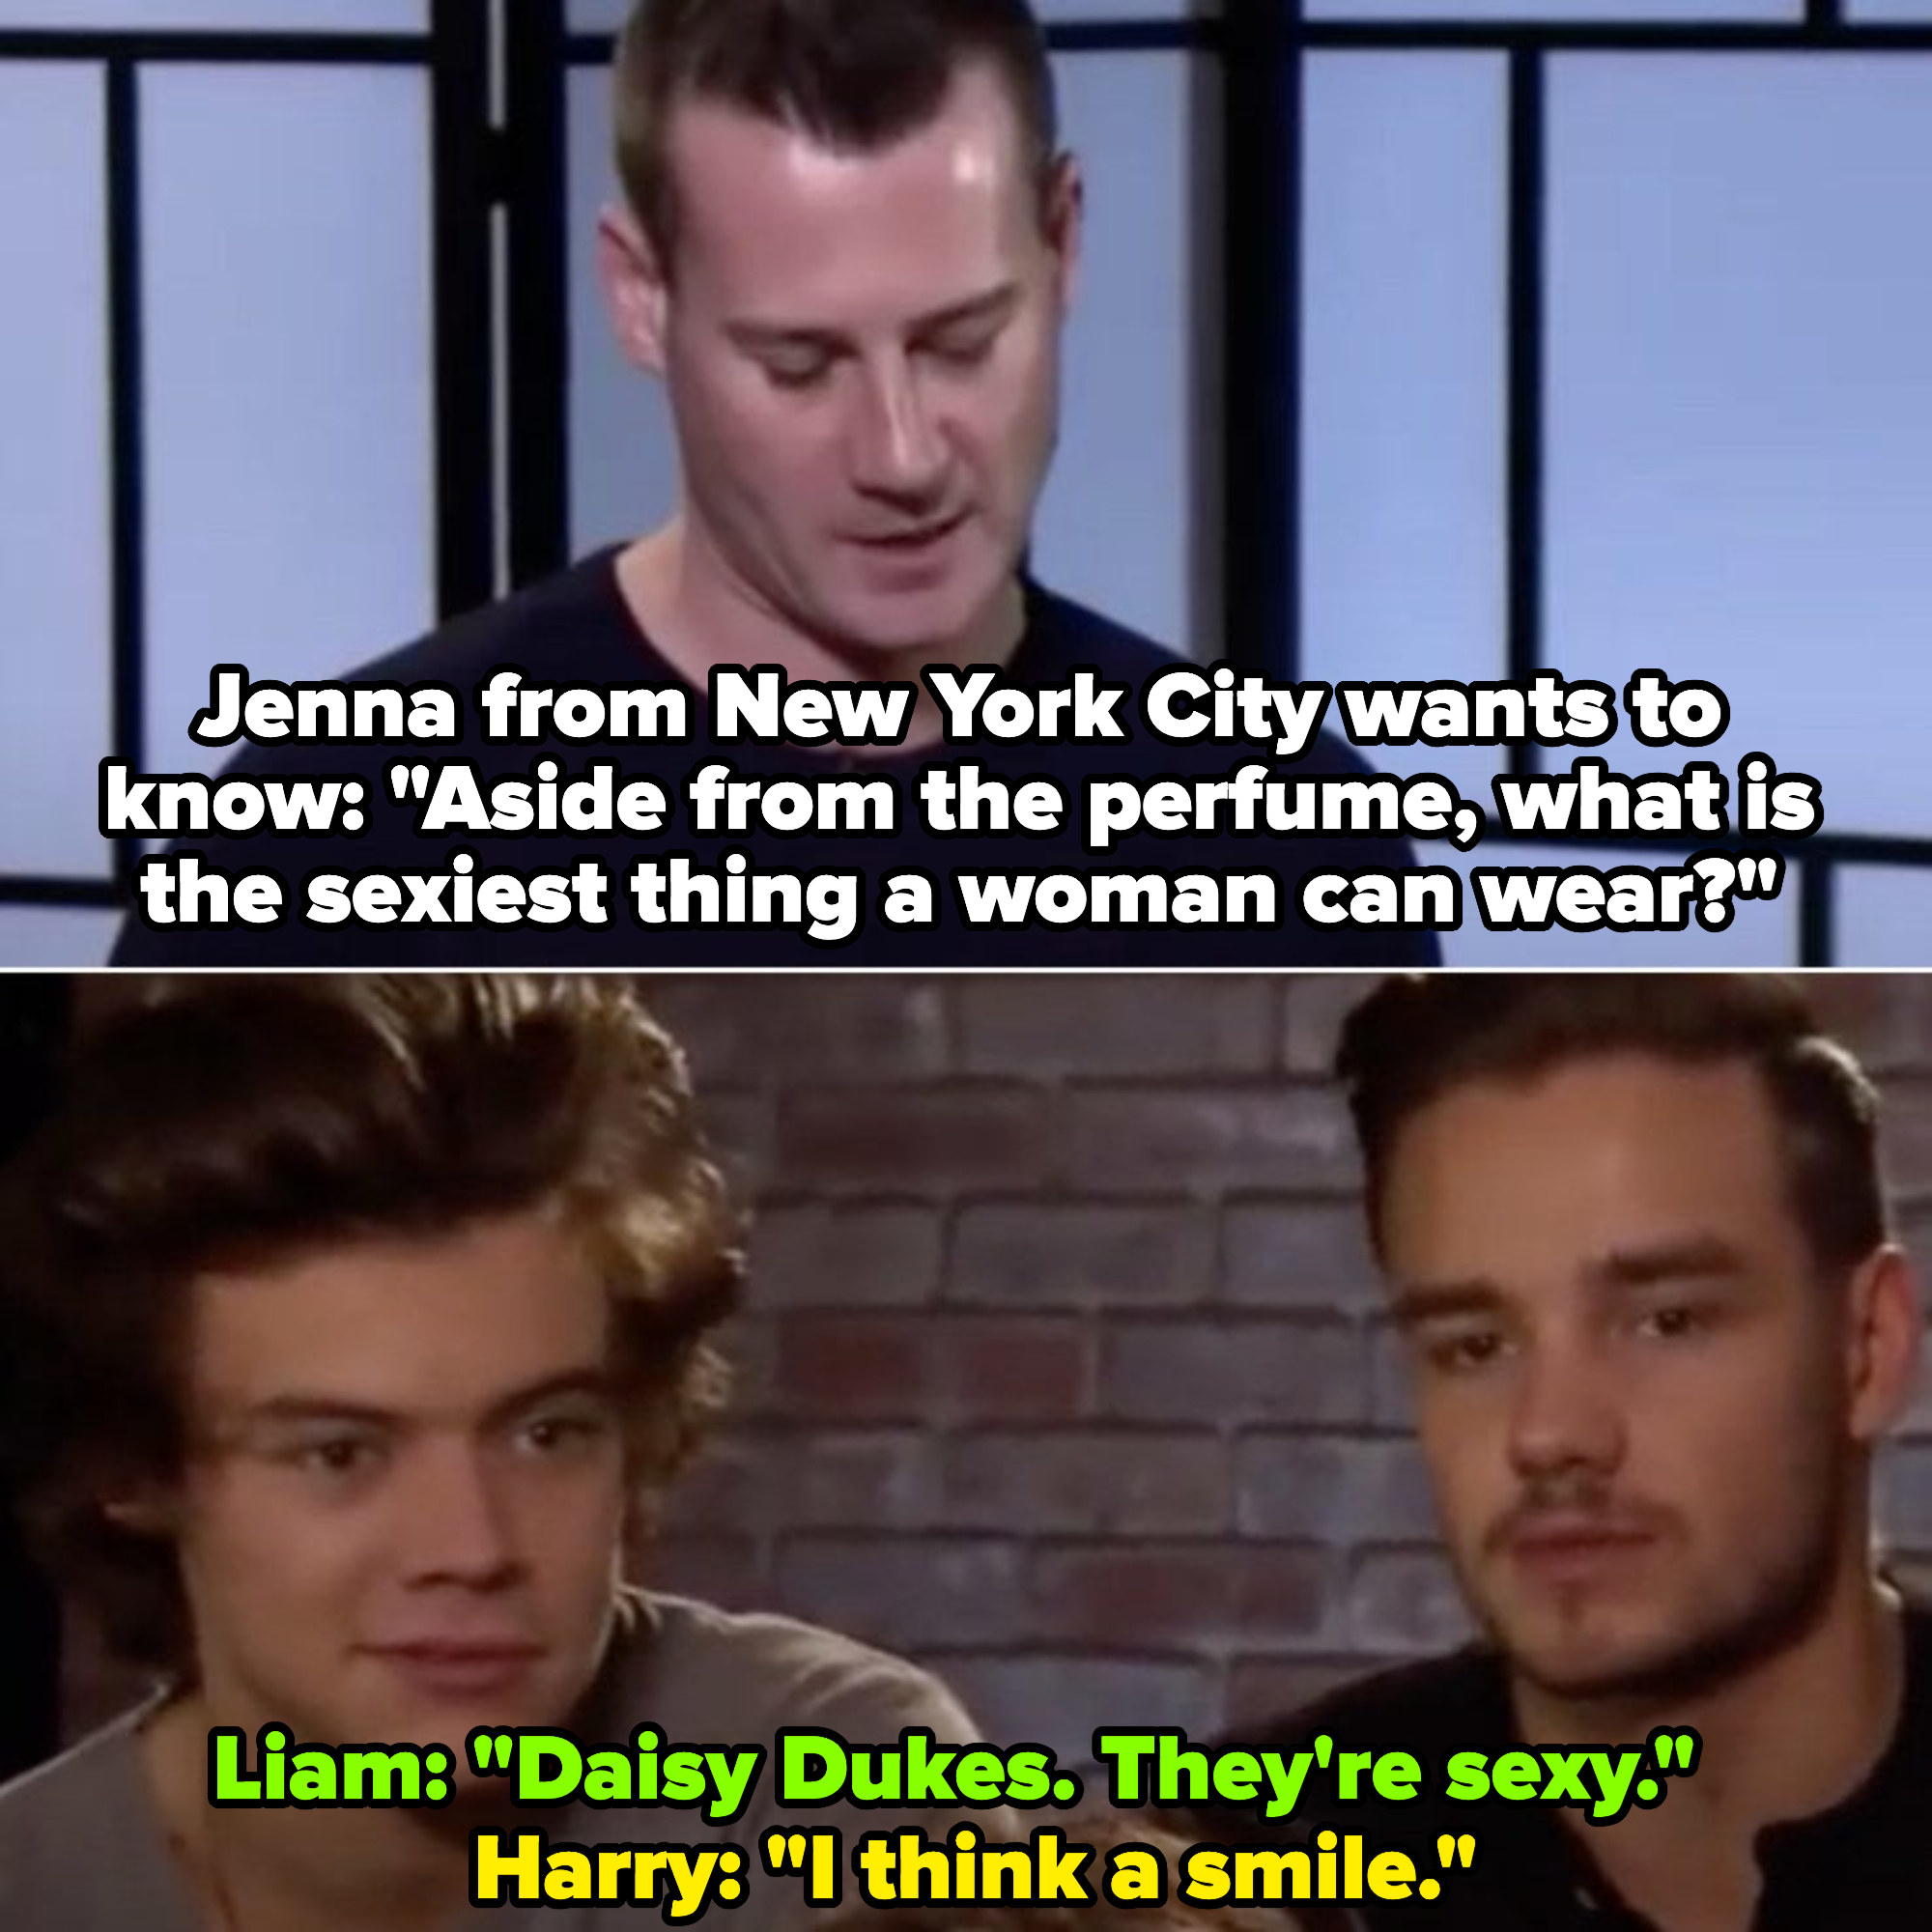 Interviewer: &quot;Aside from perfume, what&#x27;s the sexiest thing a woman can wear?&quot; Liam: &quot;Daisy Dukes. They&#x27;re sexy.&quot; Harry: &quot;I think a smile.&quot;